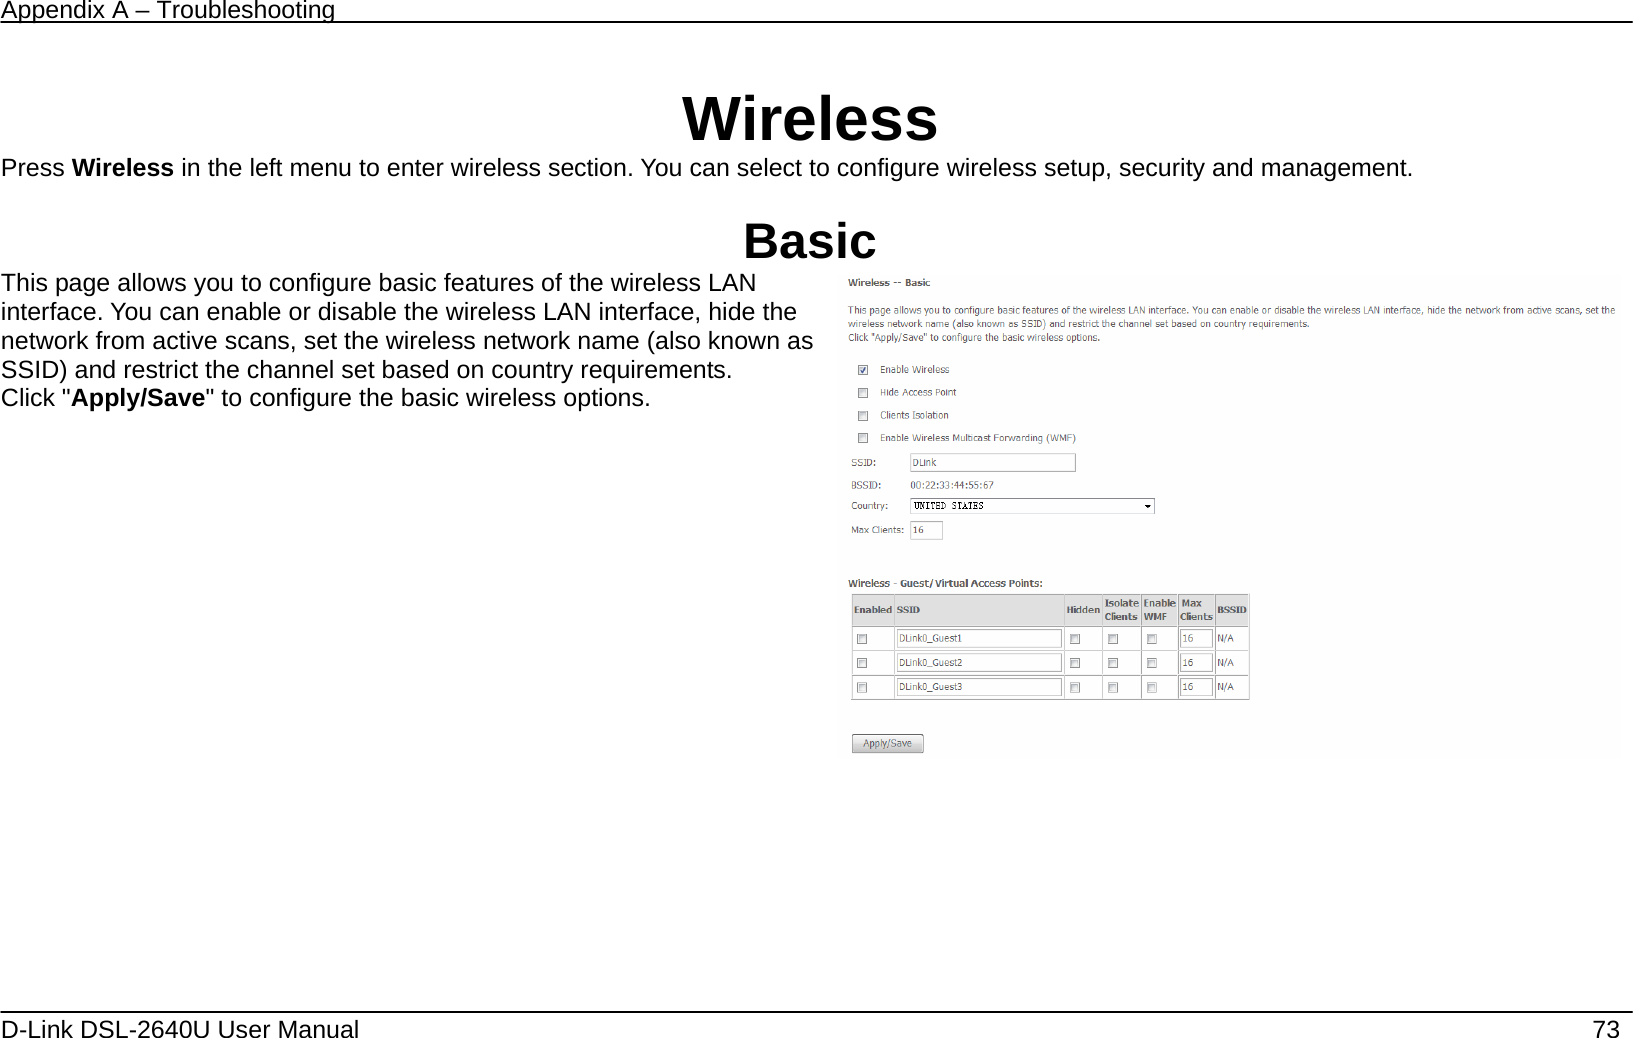 Appendix A – Troubleshooting   D-Link DSL-2640U User Manual    73  Wireless Press Wireless in the left menu to enter wireless section. You can select to configure wireless setup, security and management.  Basic This page allows you to configure basic features of the wireless LAN interface. You can enable or disable the wireless LAN interface, hide the network from active scans, set the wireless network name (also known as SSID) and restrict the channel set based on country requirements. Click &quot;Apply/Save&quot; to configure the basic wireless options.         